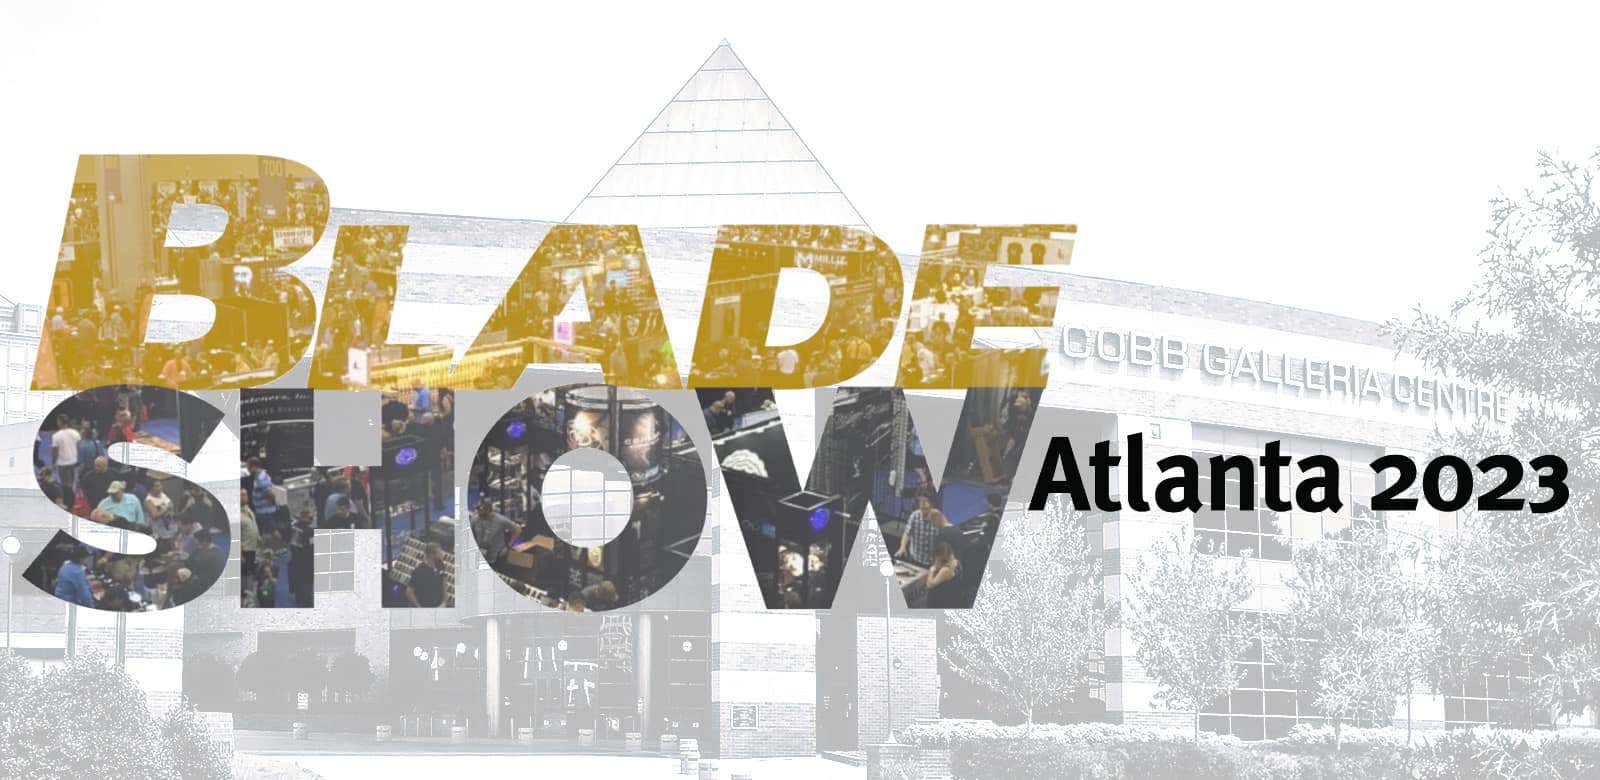 Blade Show in Atlanta 2023 Raises $5,400 for Building Homes for Heroes